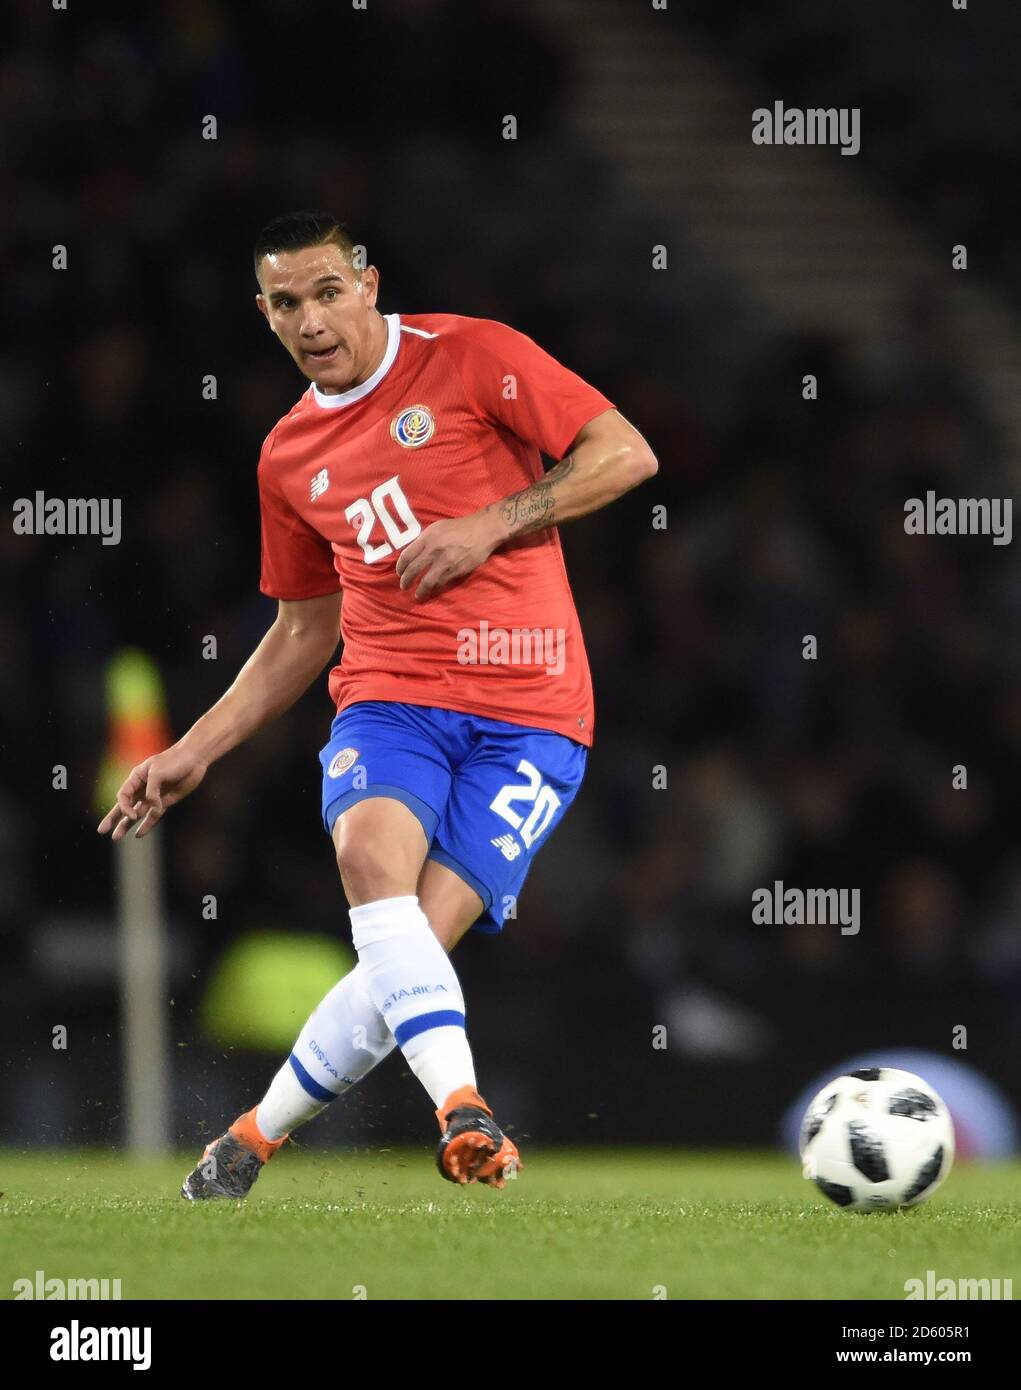 Costa Rica's David Guzman in action during the international friendly match at Hampden Park, Glasgow. RESTRICTIONS: Use subject to restrictions. Editorial use only. Commercial use only with prior written consent of the Scottish FA. Stock Photo